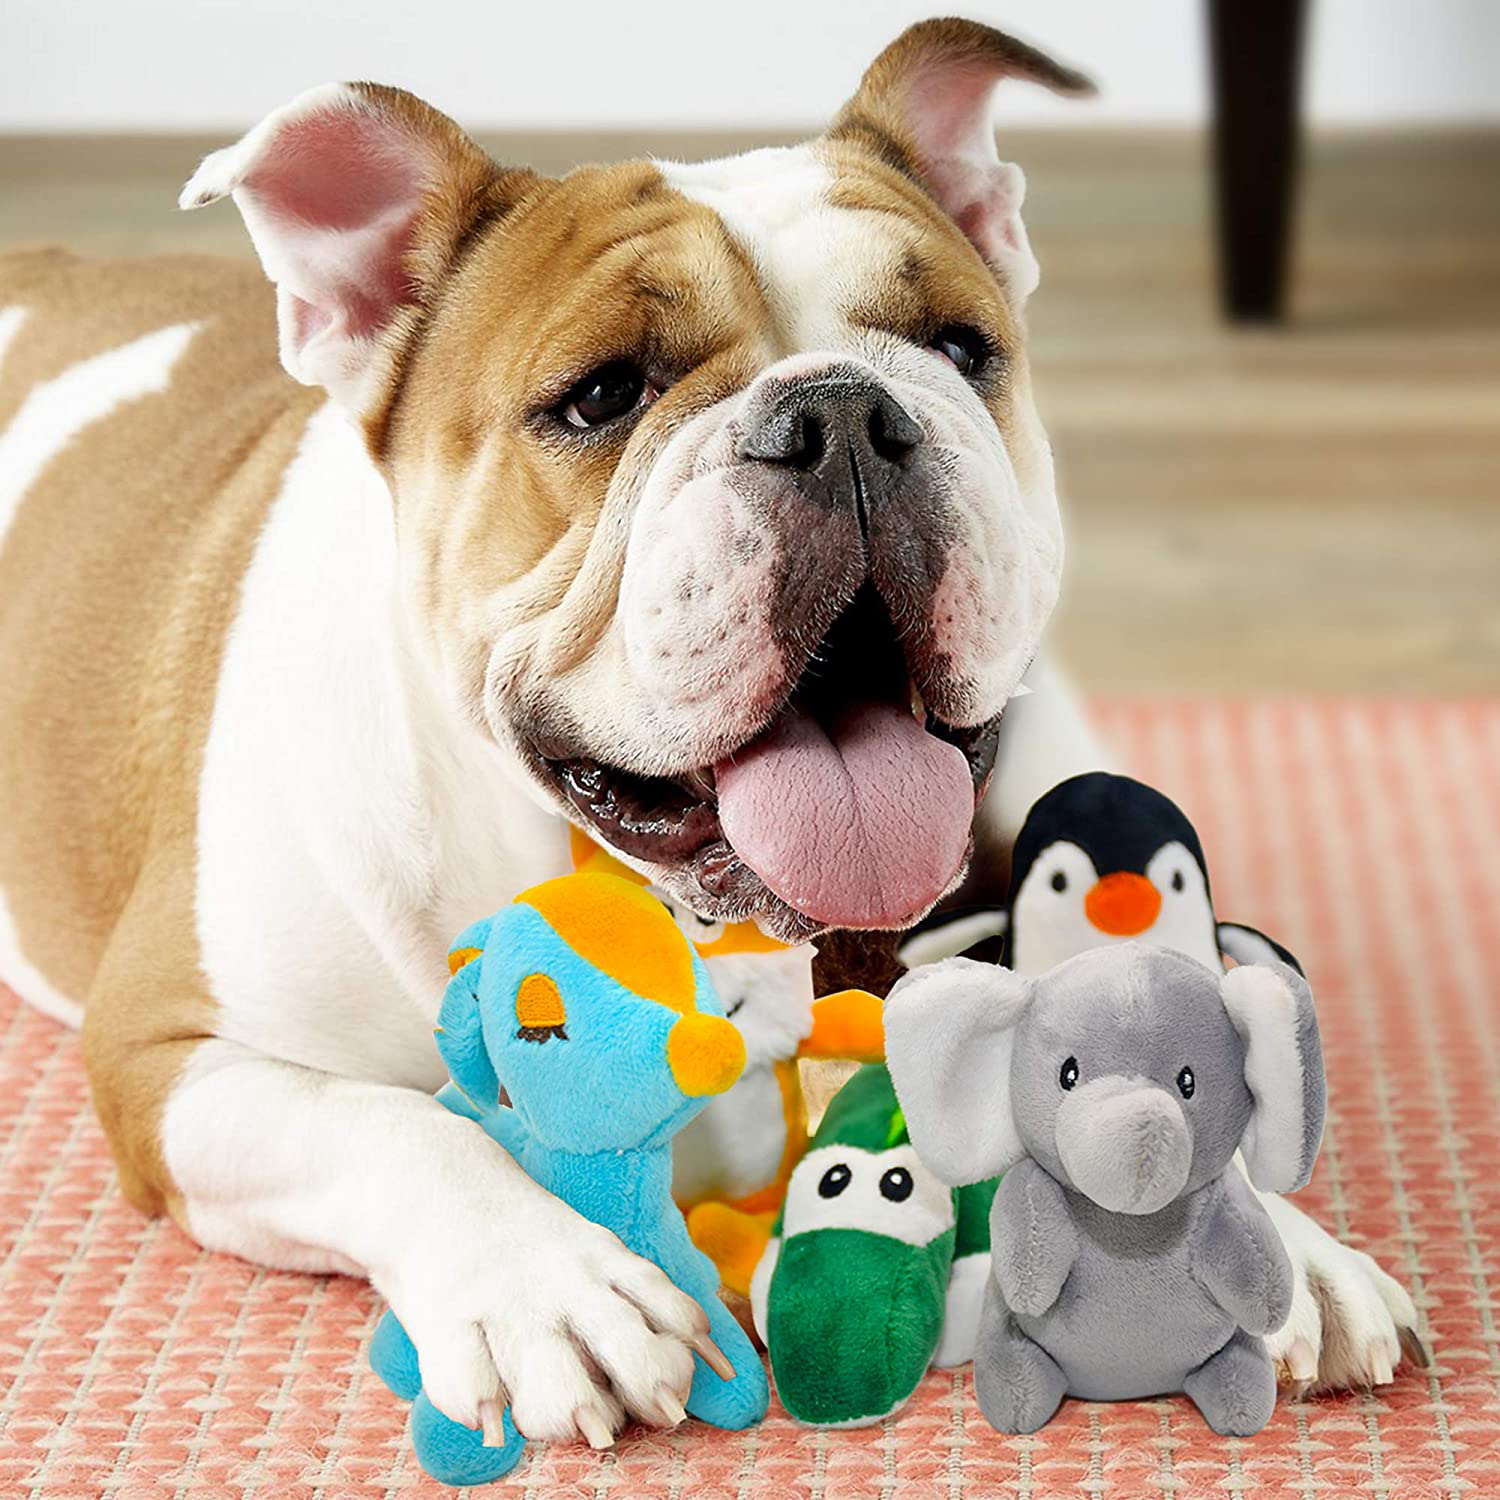 Cute Plush Toys Dog Squeaky Toys Funny Chew Toy For Small Medium